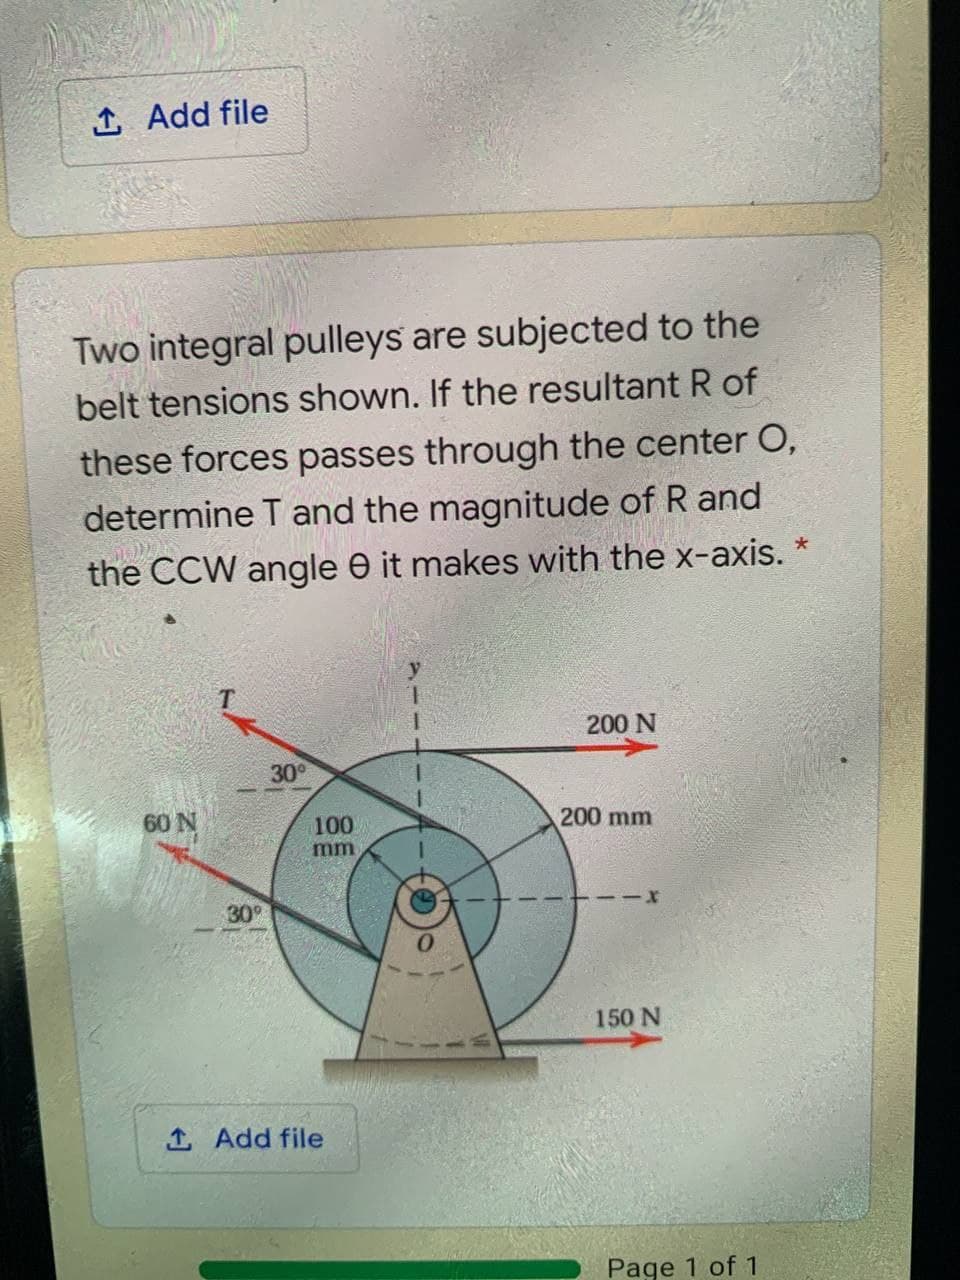 1 Add file
Two integral pulleys are subjected to the
belt tensions shown. If the resultant R of
these forces passes through the center O,
determine T and the magnitude of R and
the CCW angle e it makes with the x-axis.
200 N
30
60 N
100
200 mm
mm
30
150 N
1 Add file
Page 1 of 1
